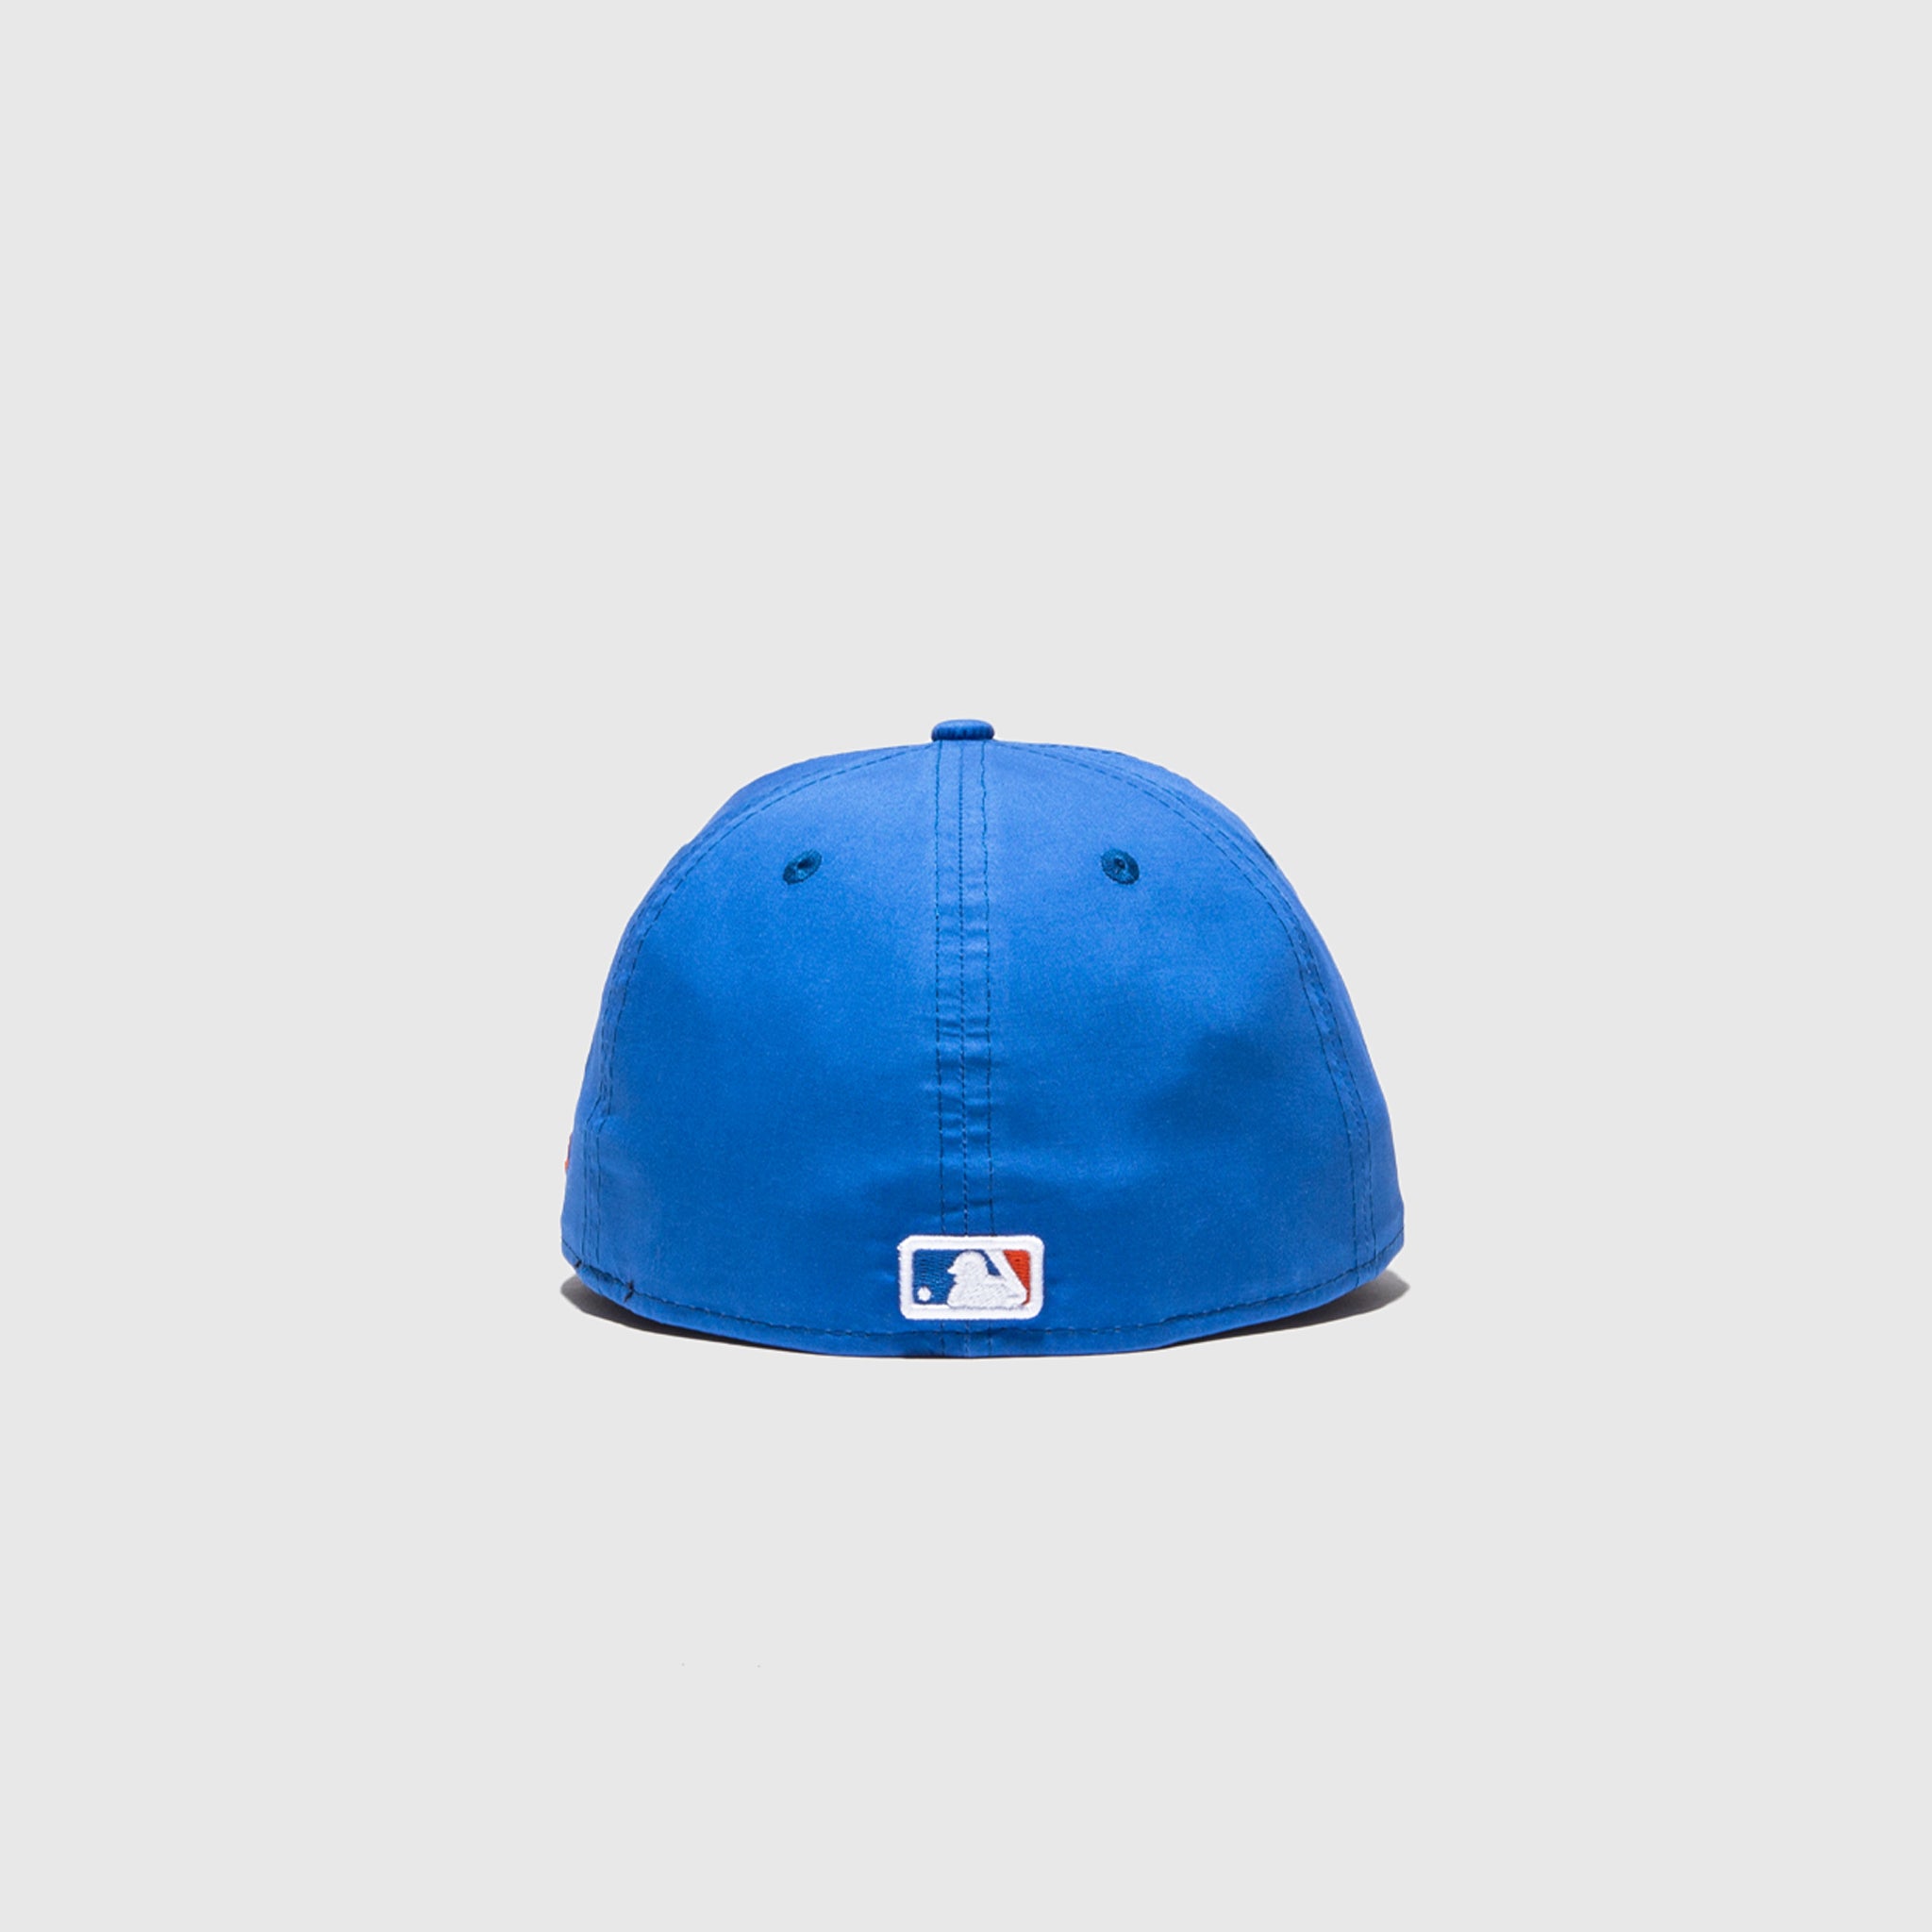 PACKER X NEW ERA NEW YORK METS "NYLON" 59FIFTY FITTED